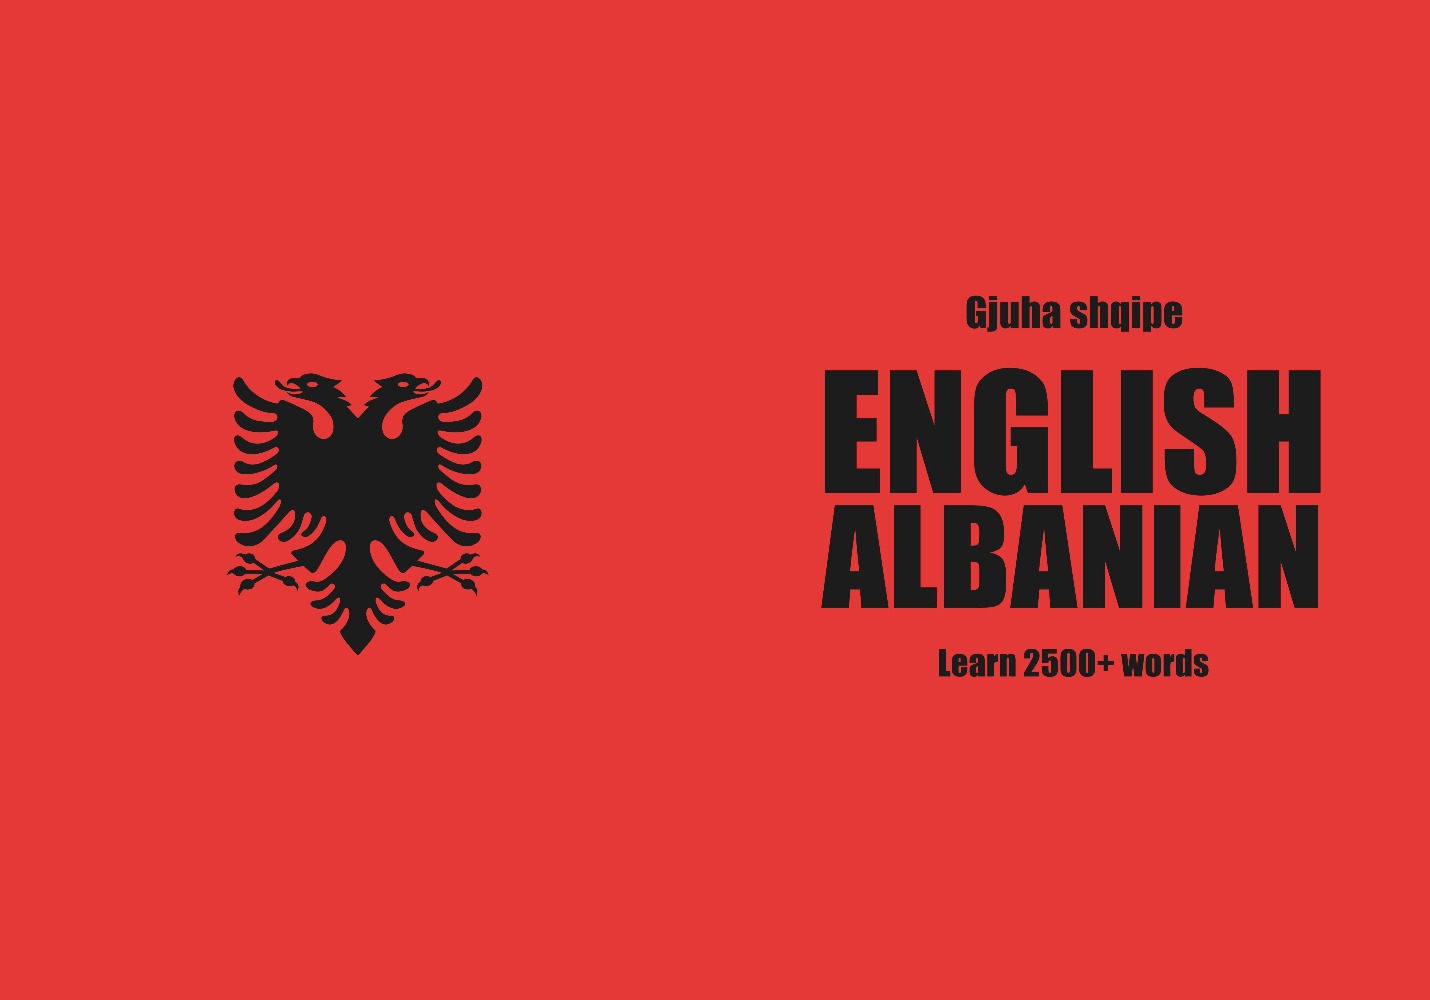 Albanian language learning notebook cover